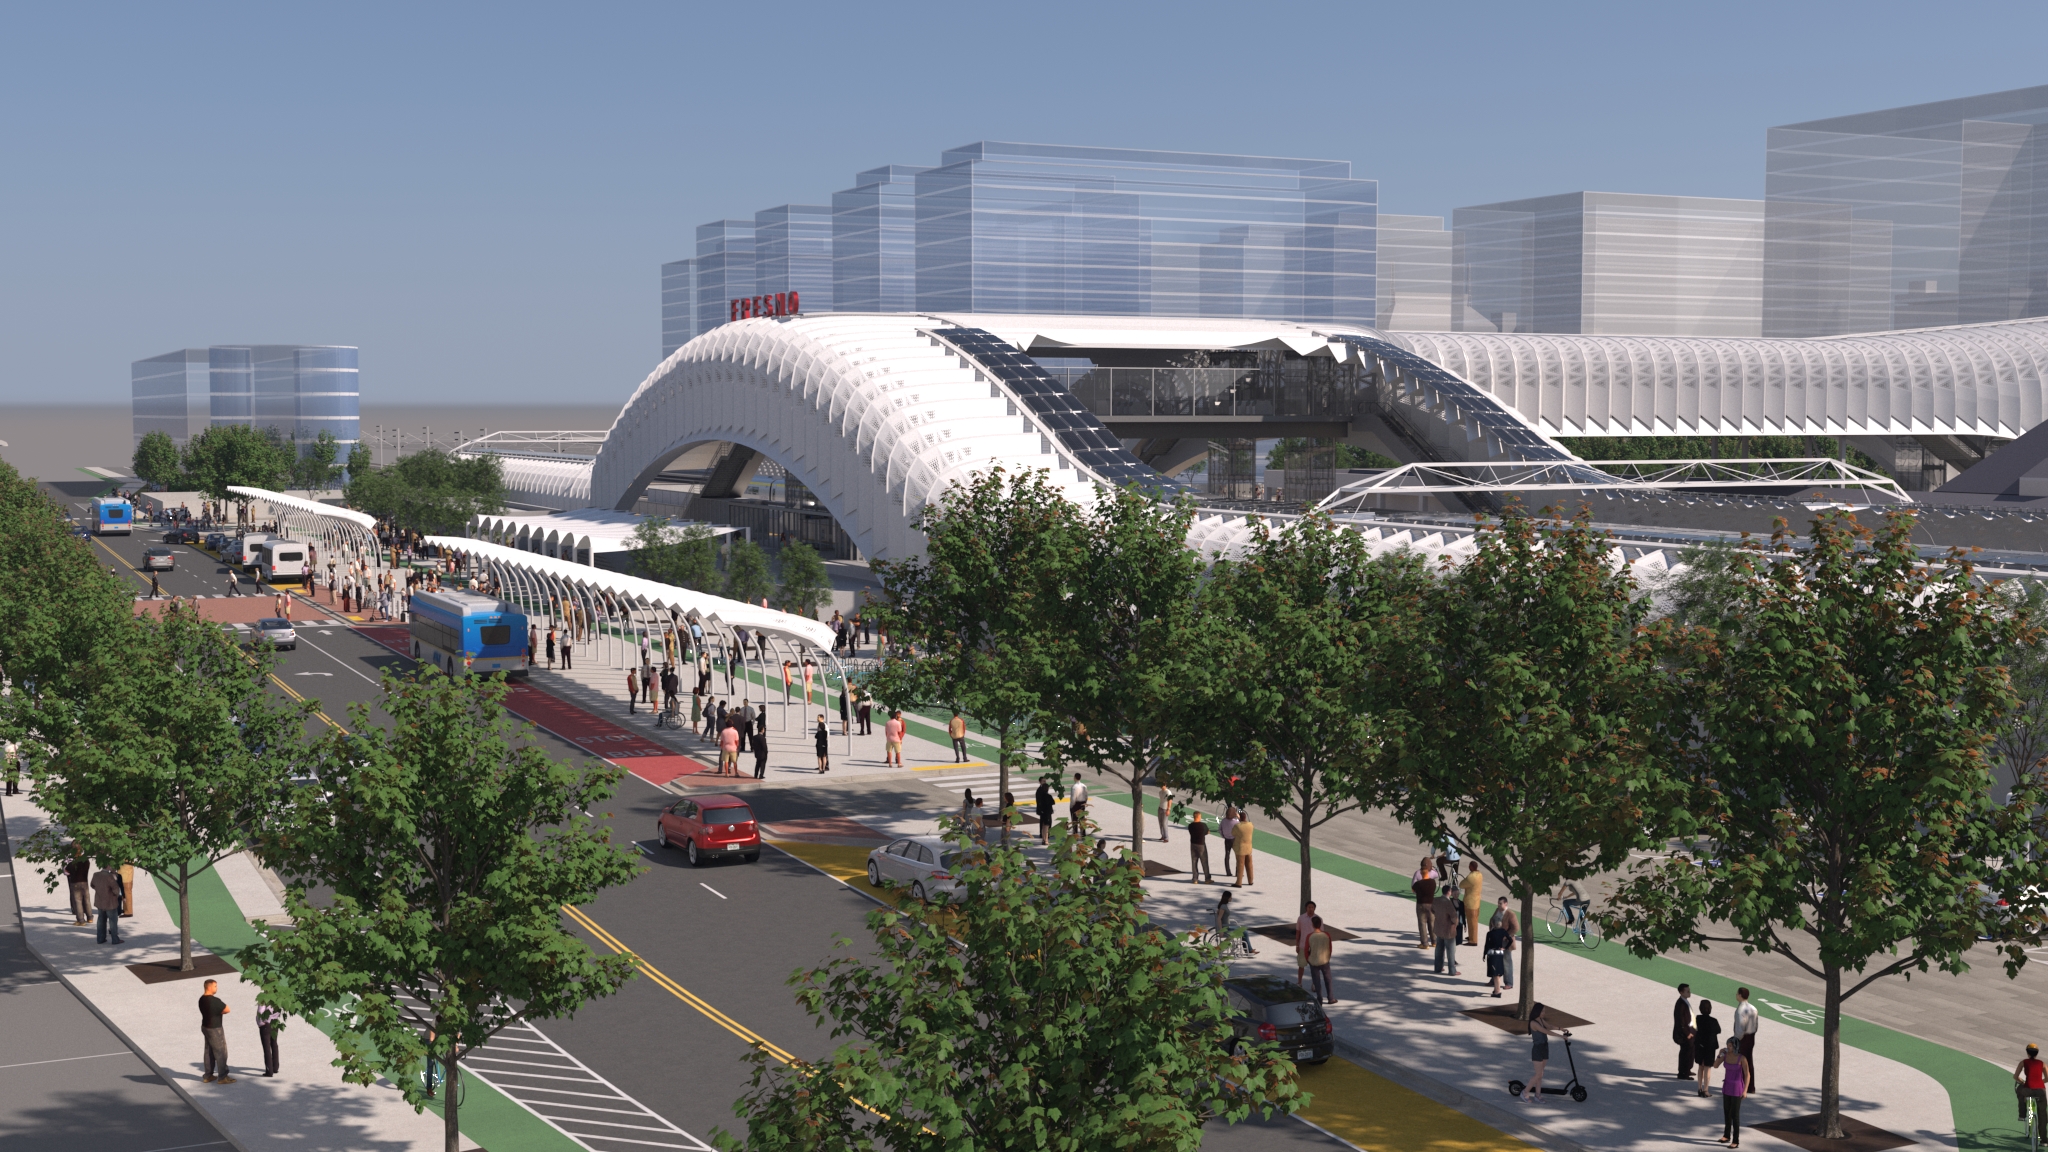 Conceptual rendering of Fresno station, one of the 4 Central Valley stations